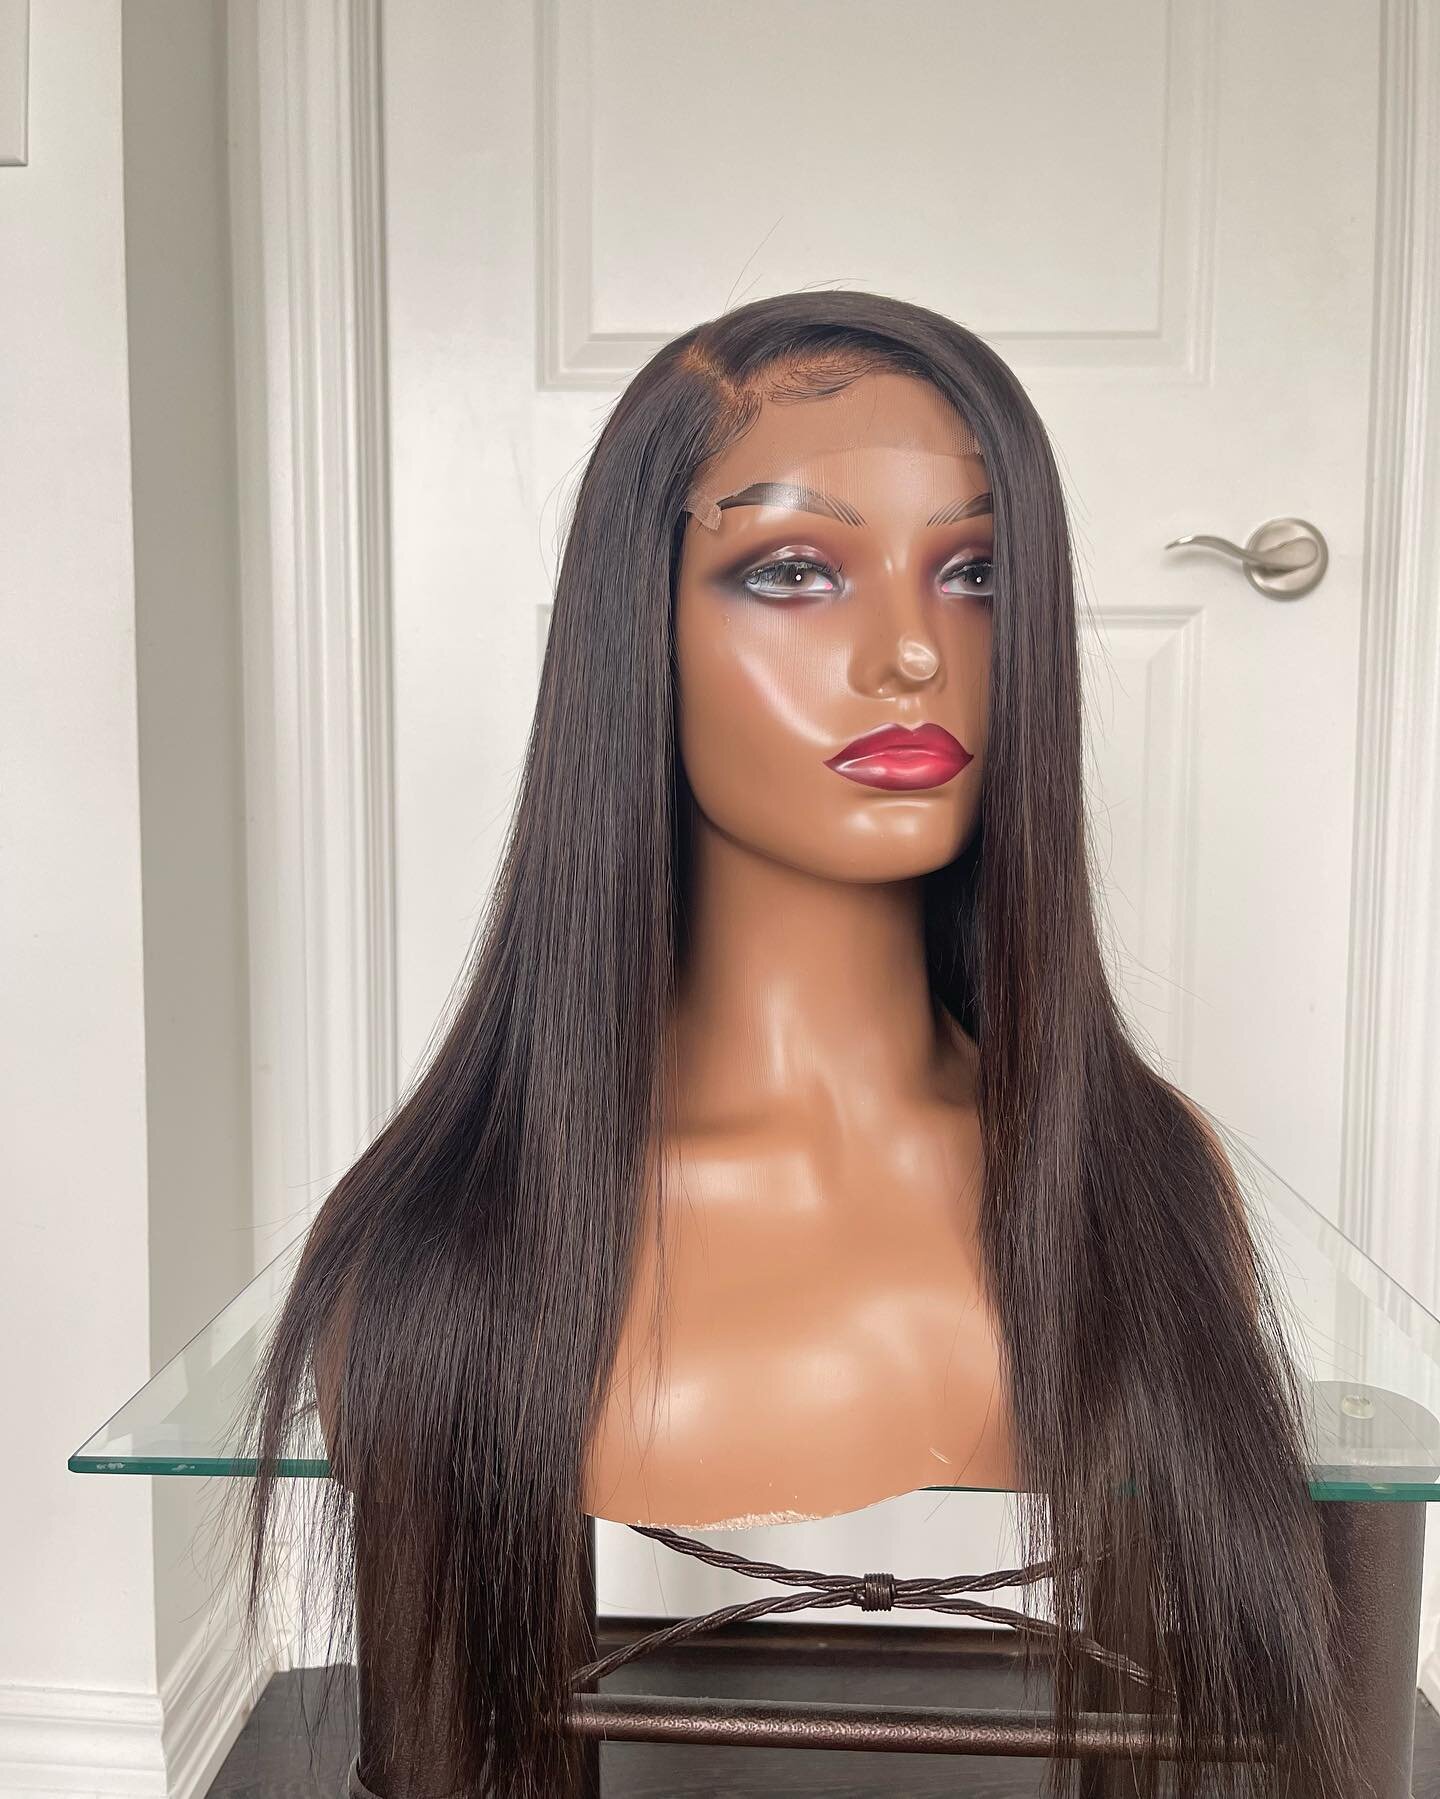 Ready to wear lace closure wig in 16-inches 

___
Shop via link in the bio 🛒 

Follow @Ntutu_Hair for more ➕

Email ntutuhairextensions@gmail.com for inquiries 📧